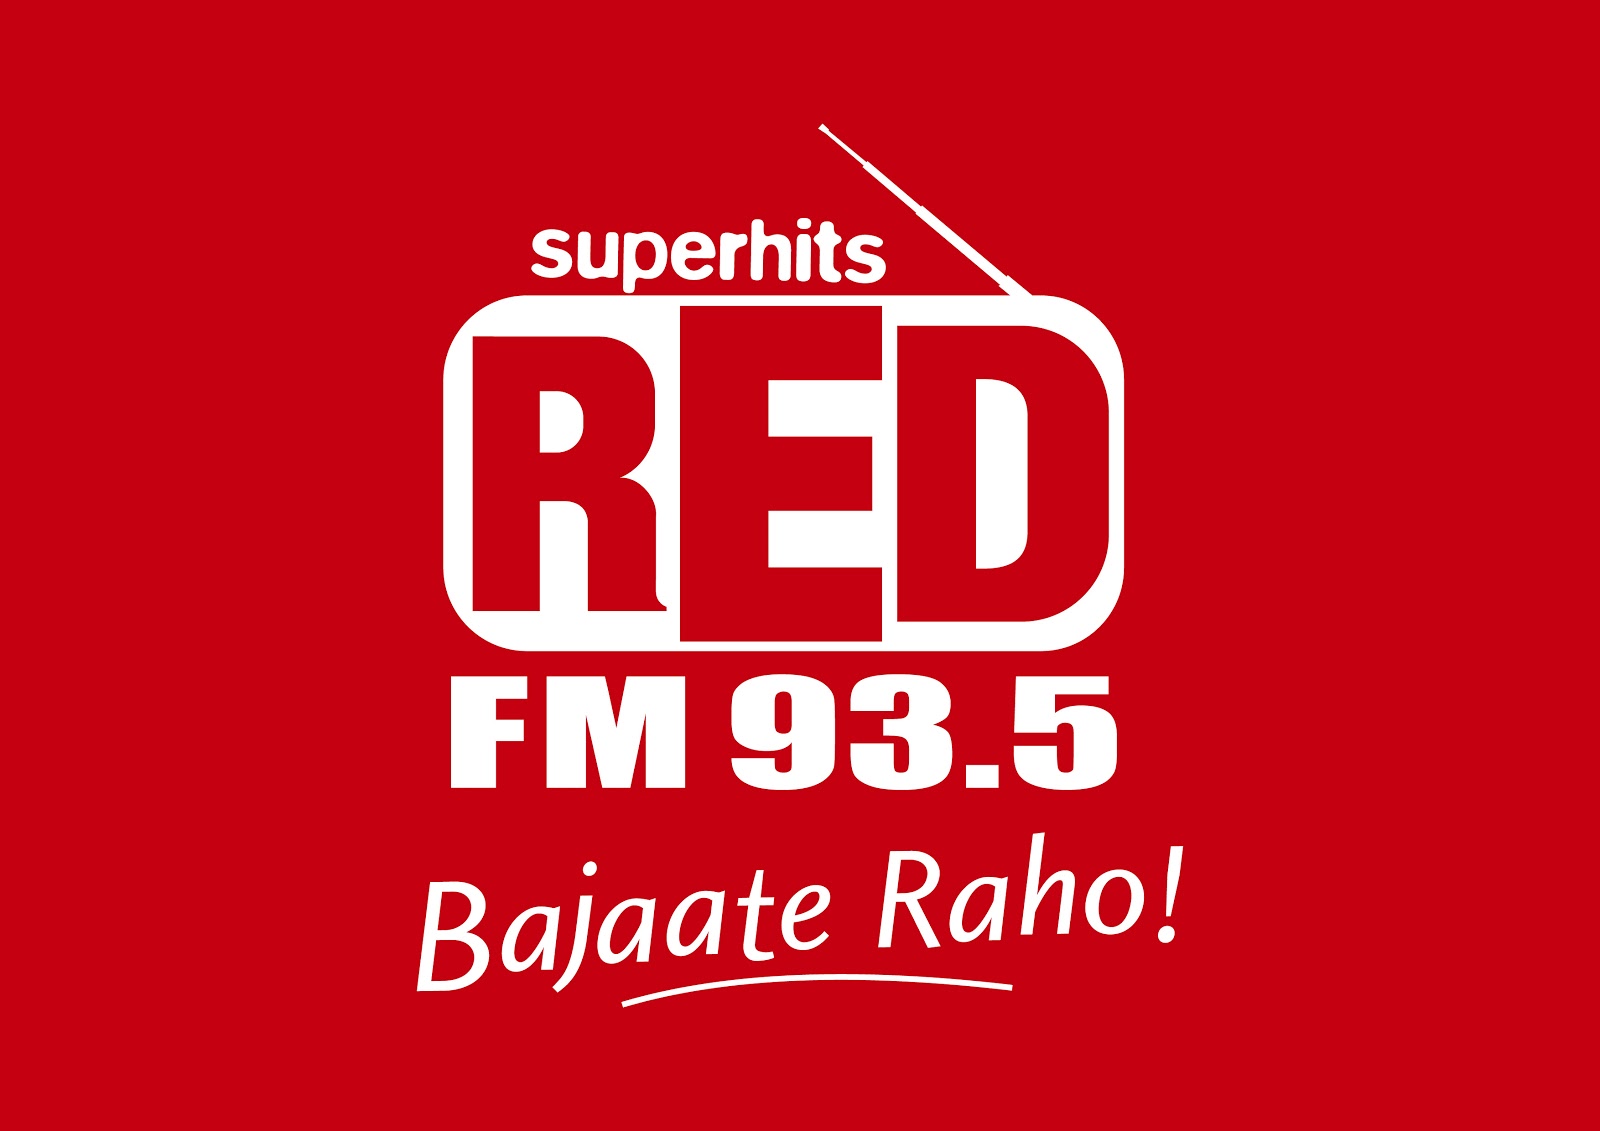 book- on- red- fm